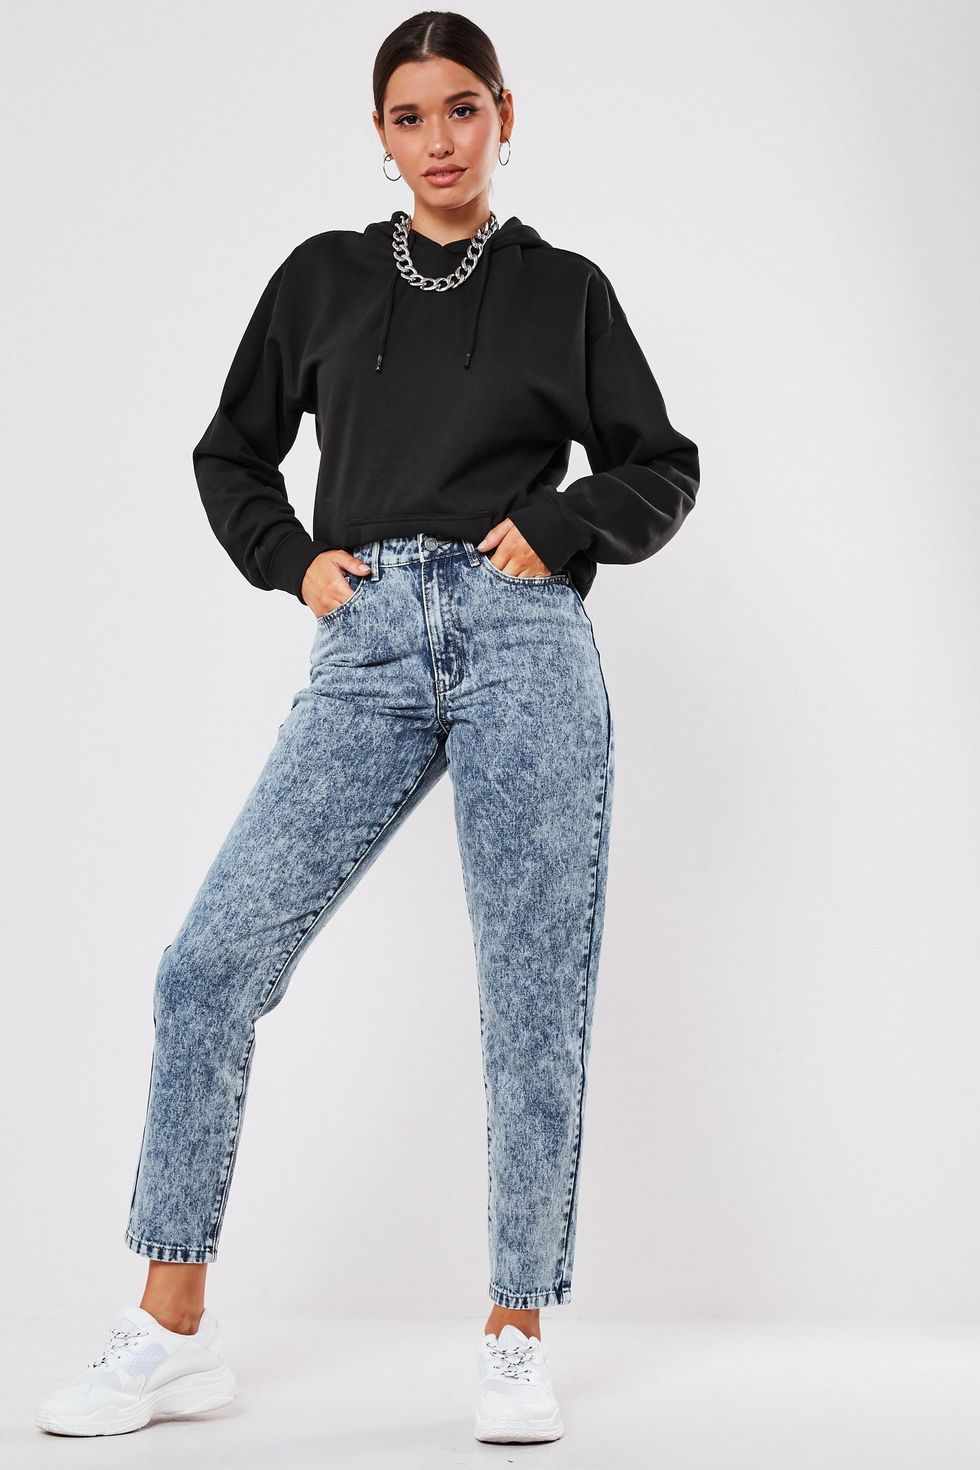 6 'jeans and a nice top' outfit ideas from a Fashion Director